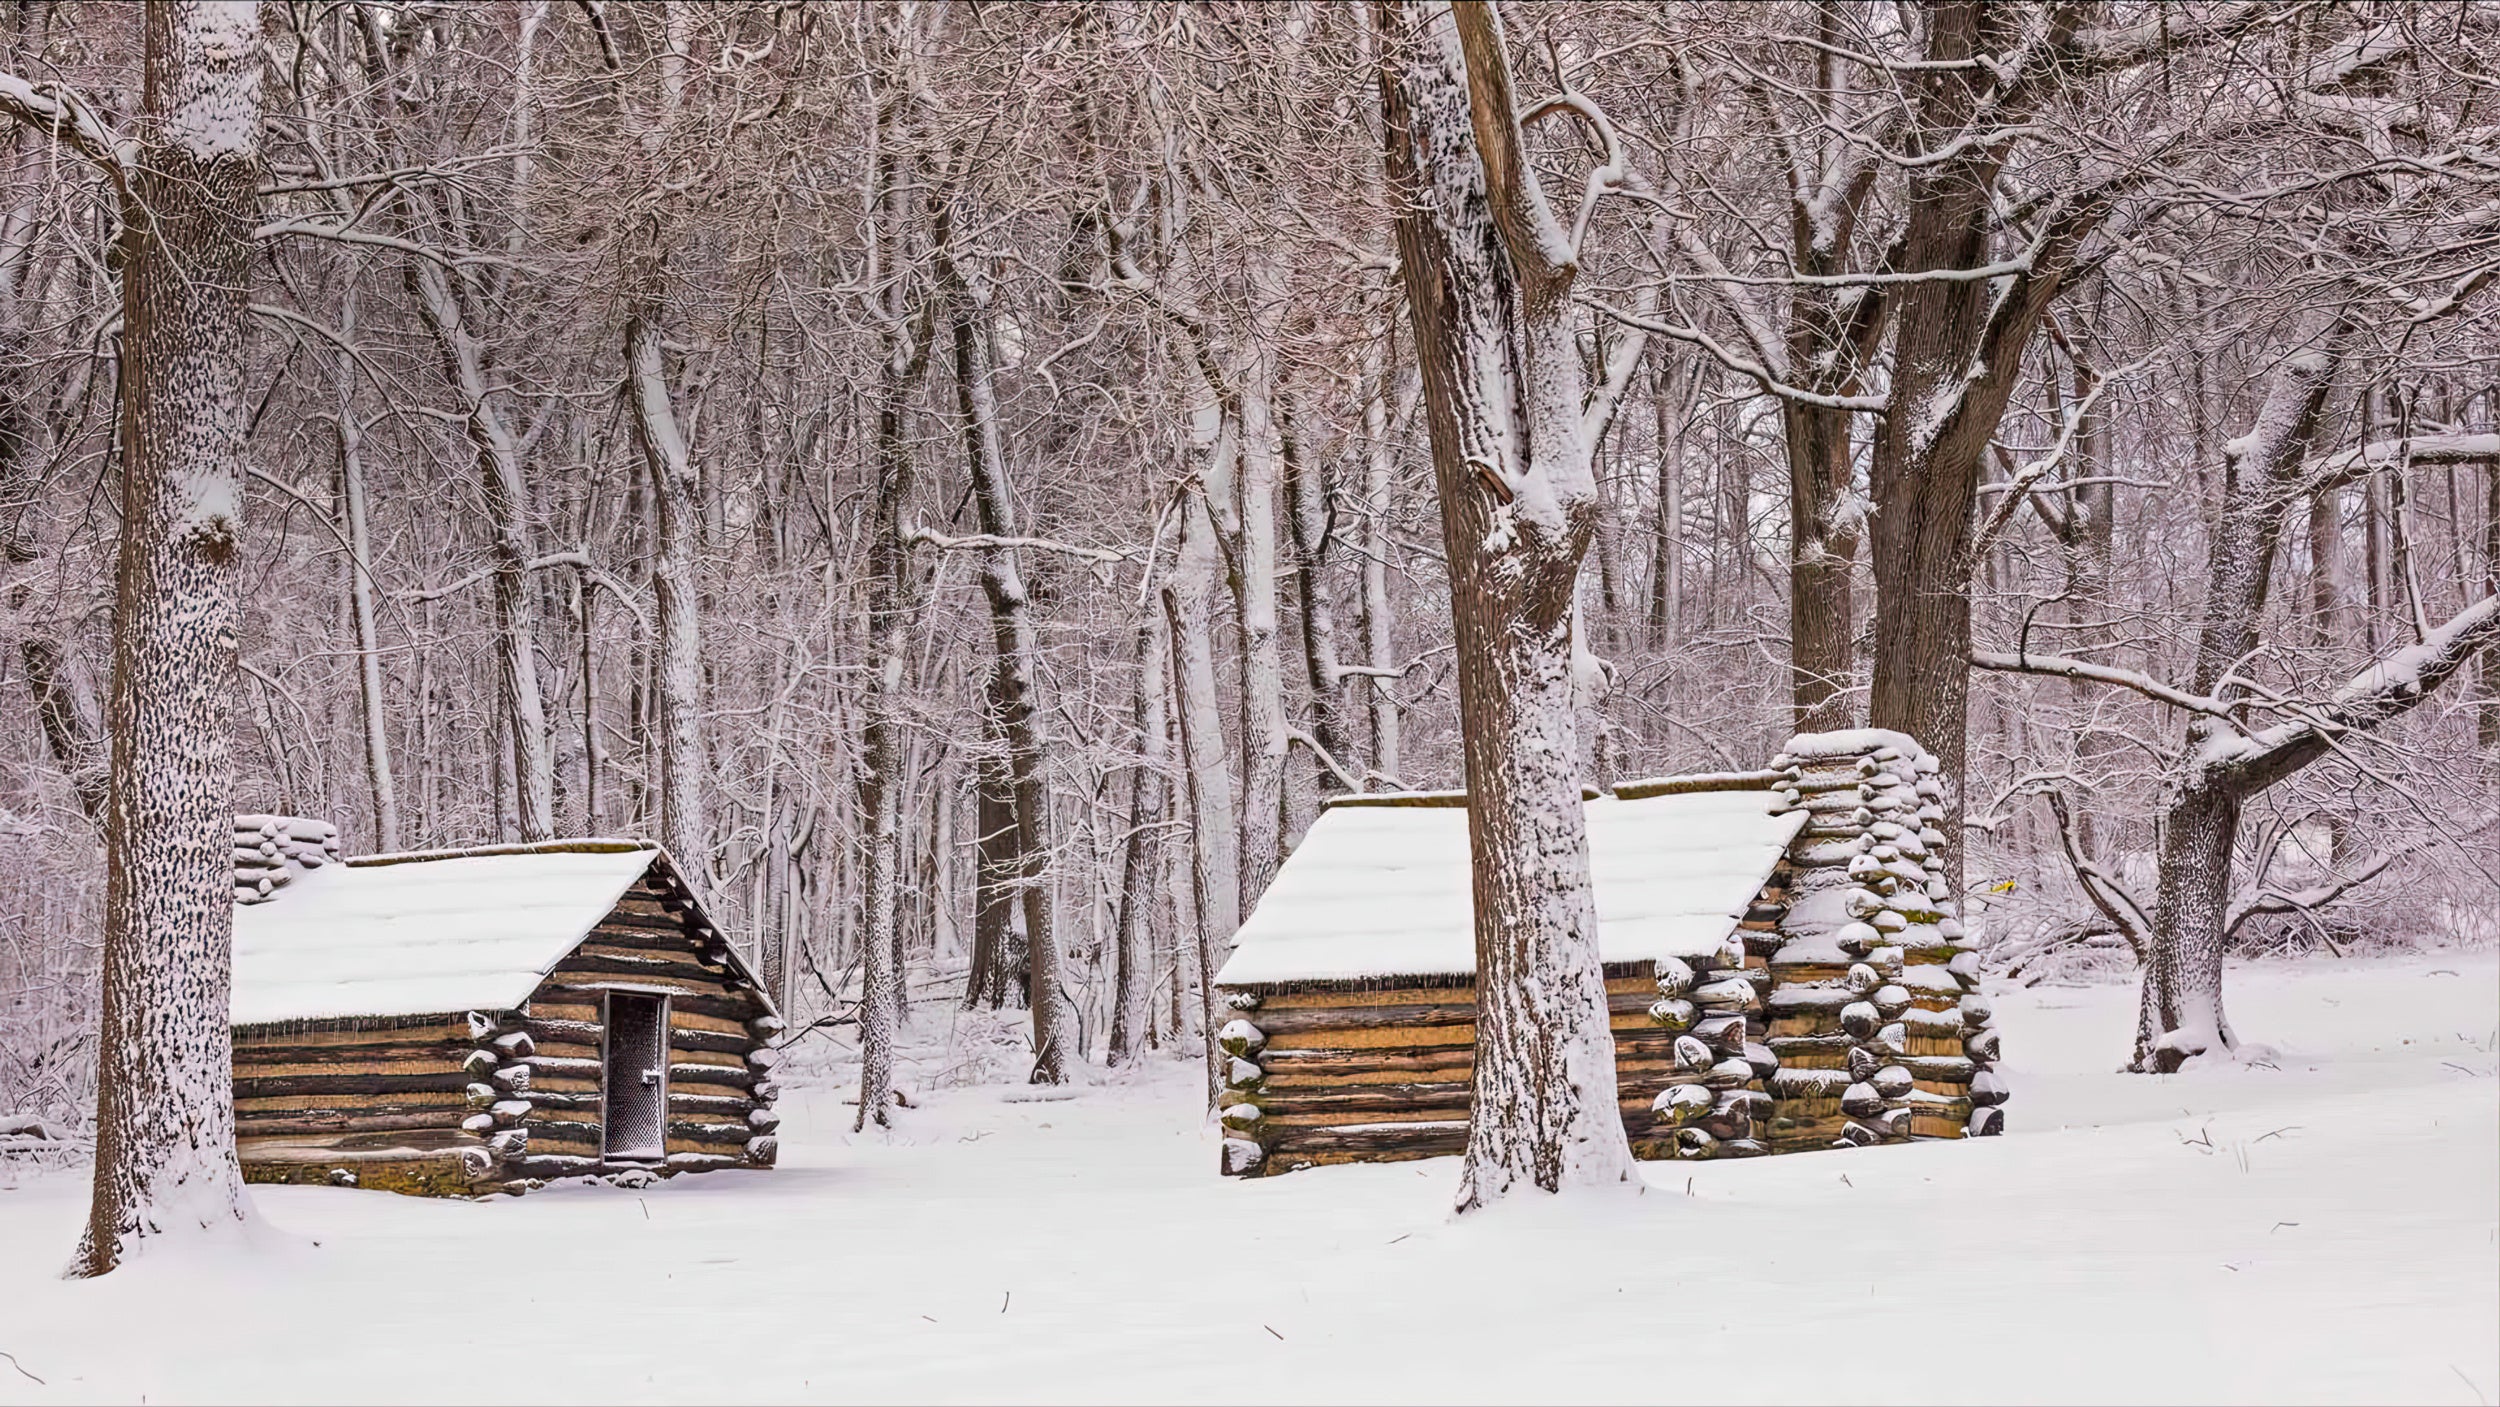 Washington at Valley Forge - Image of Snow Covered Cabins at Valley Forge